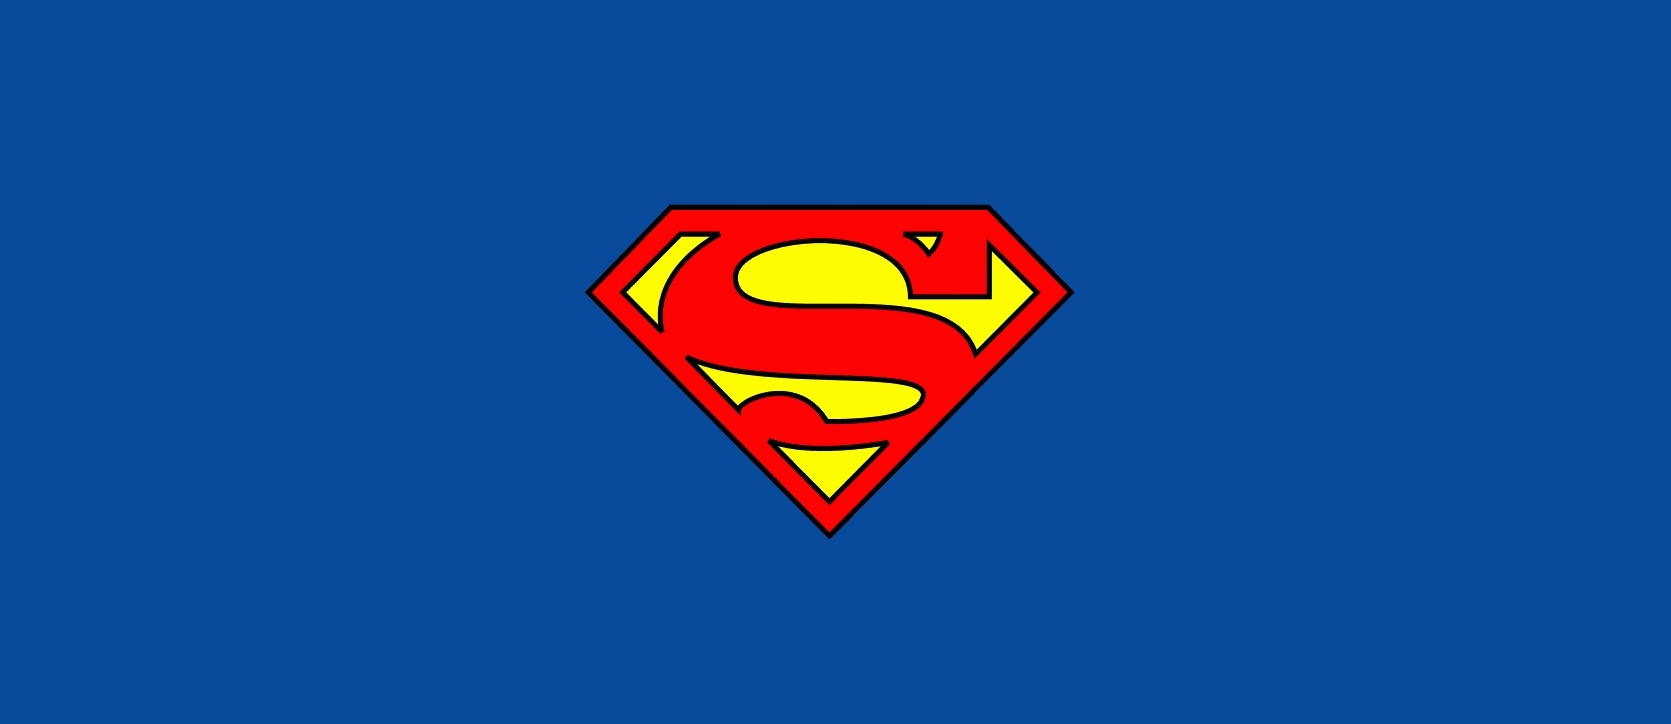 Dc Ics Declines To Allow Superman Logo On Memorial For Slain Child